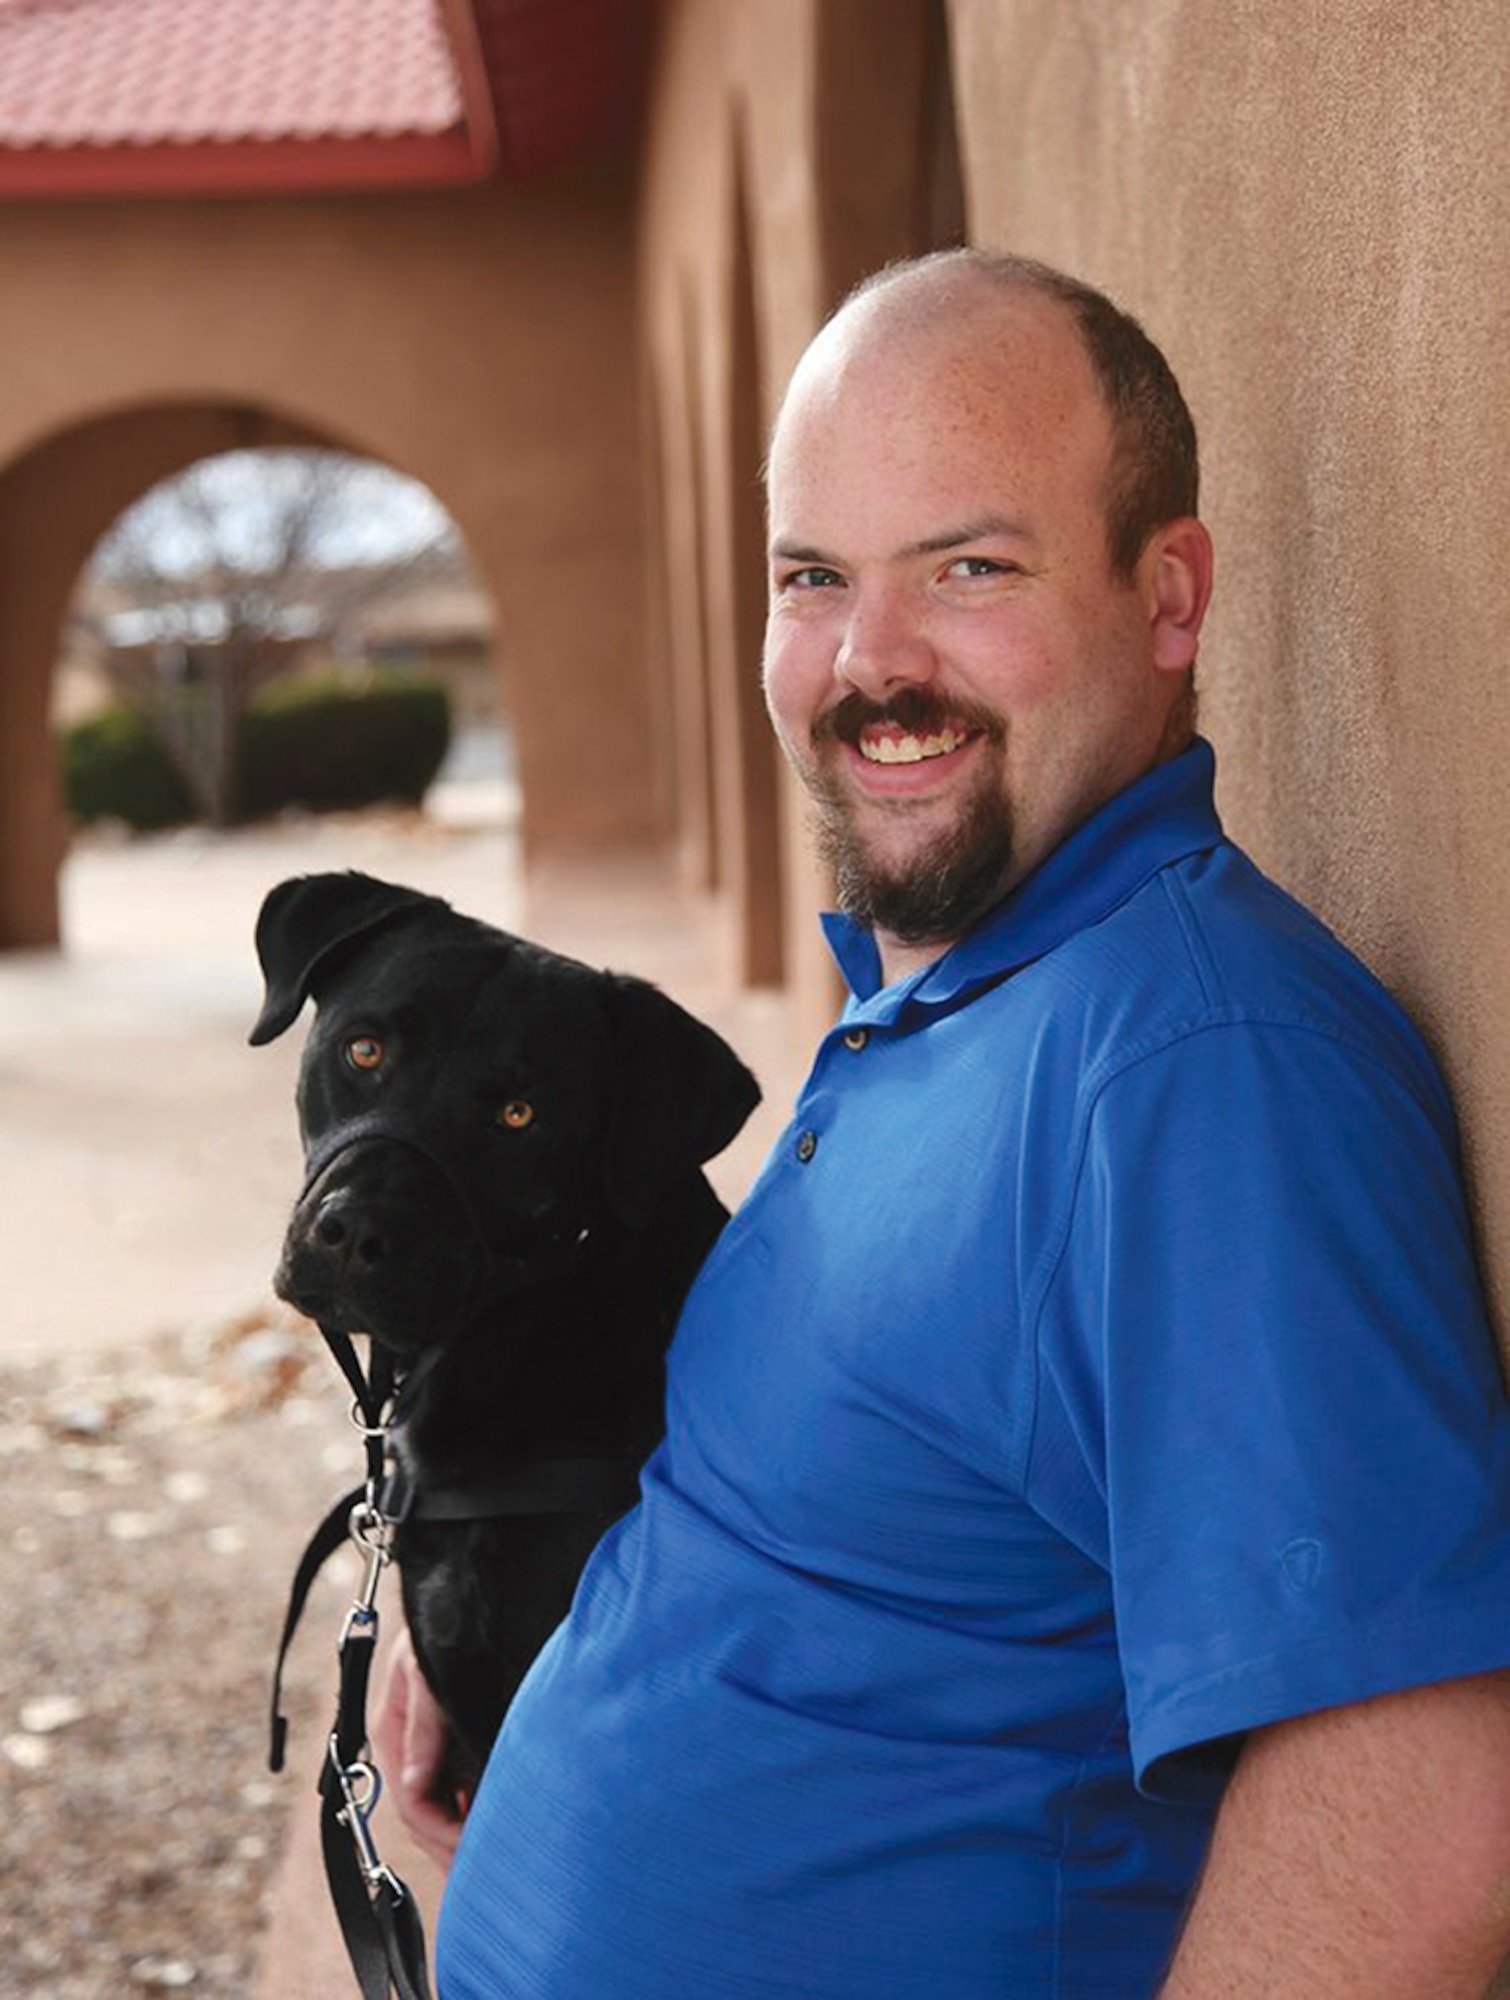 Marine Corps veteran Joshua Kendall and his service dog, Gromit, are among the vets and dogs brought together by Paws and Stripes. (Courtesy photo)